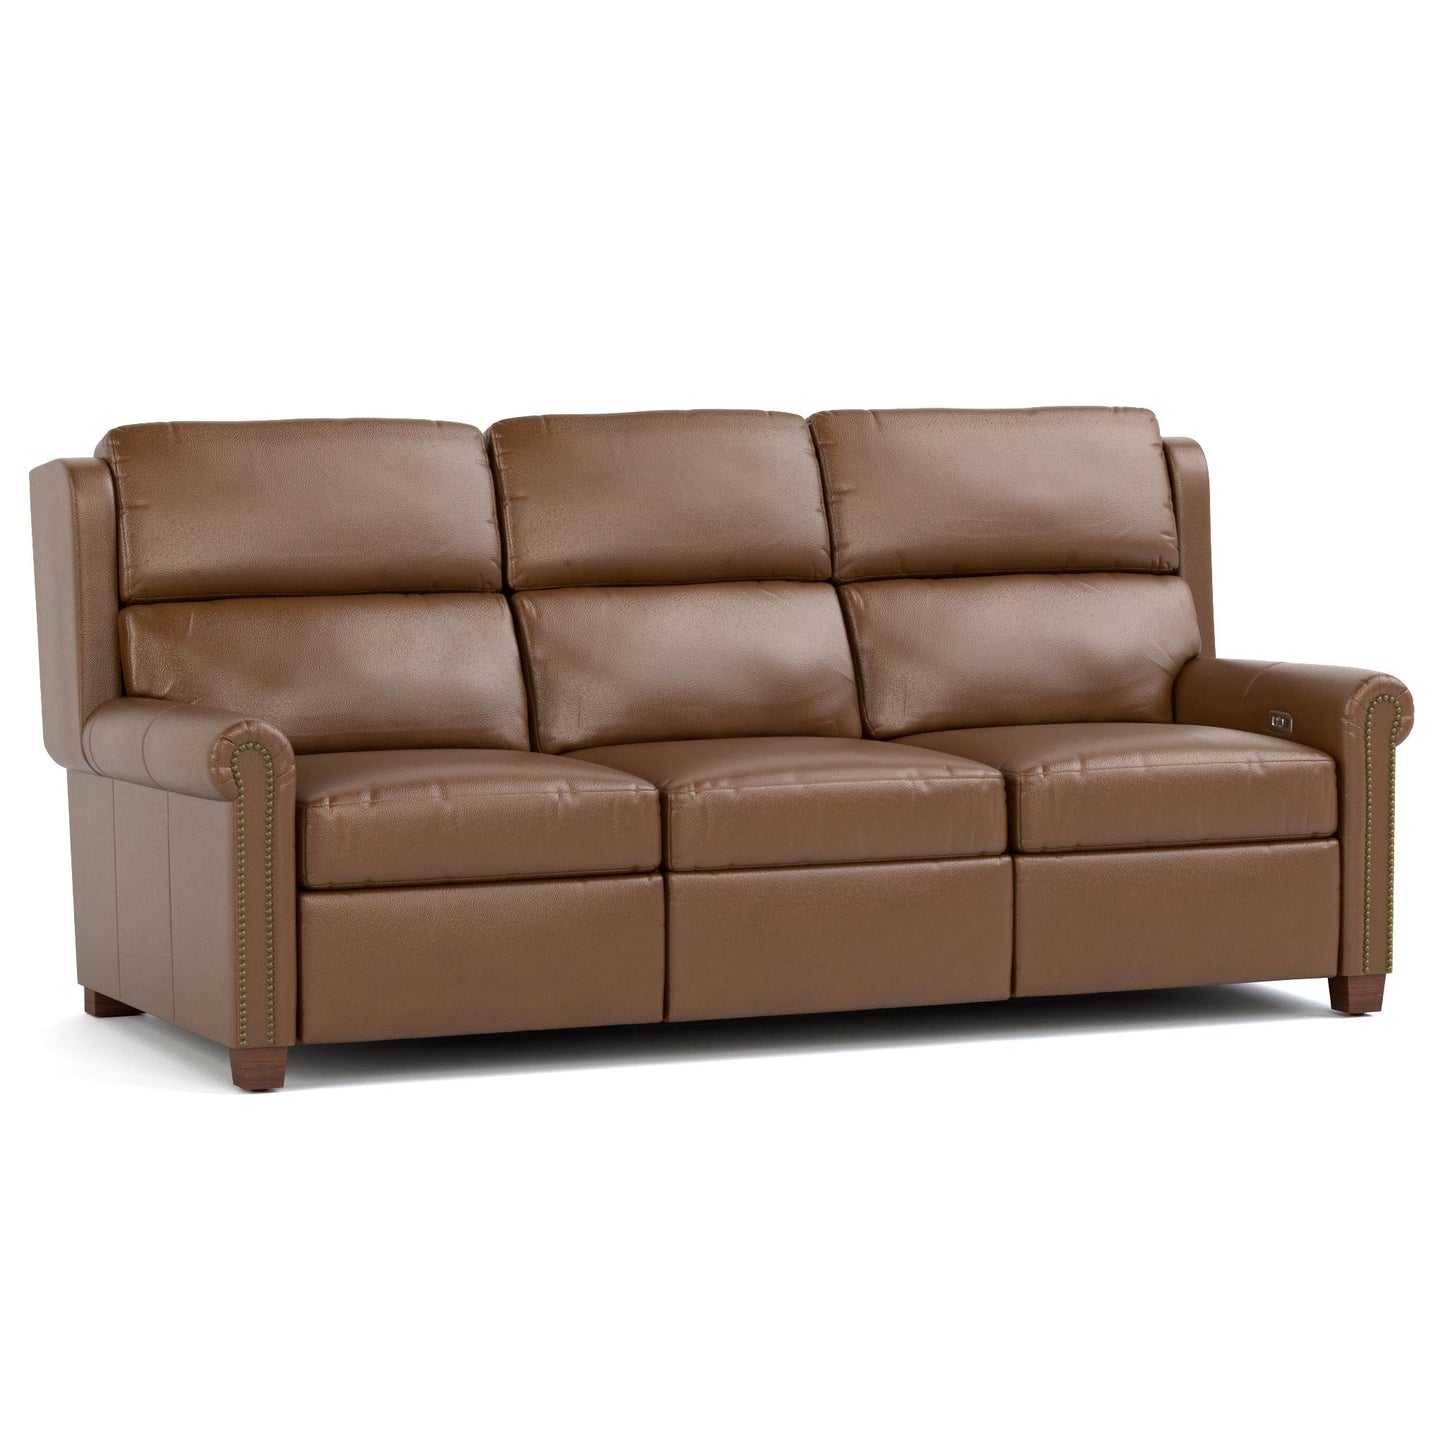 Woodlands Small Roll Arm Motion Loveseat with Nails